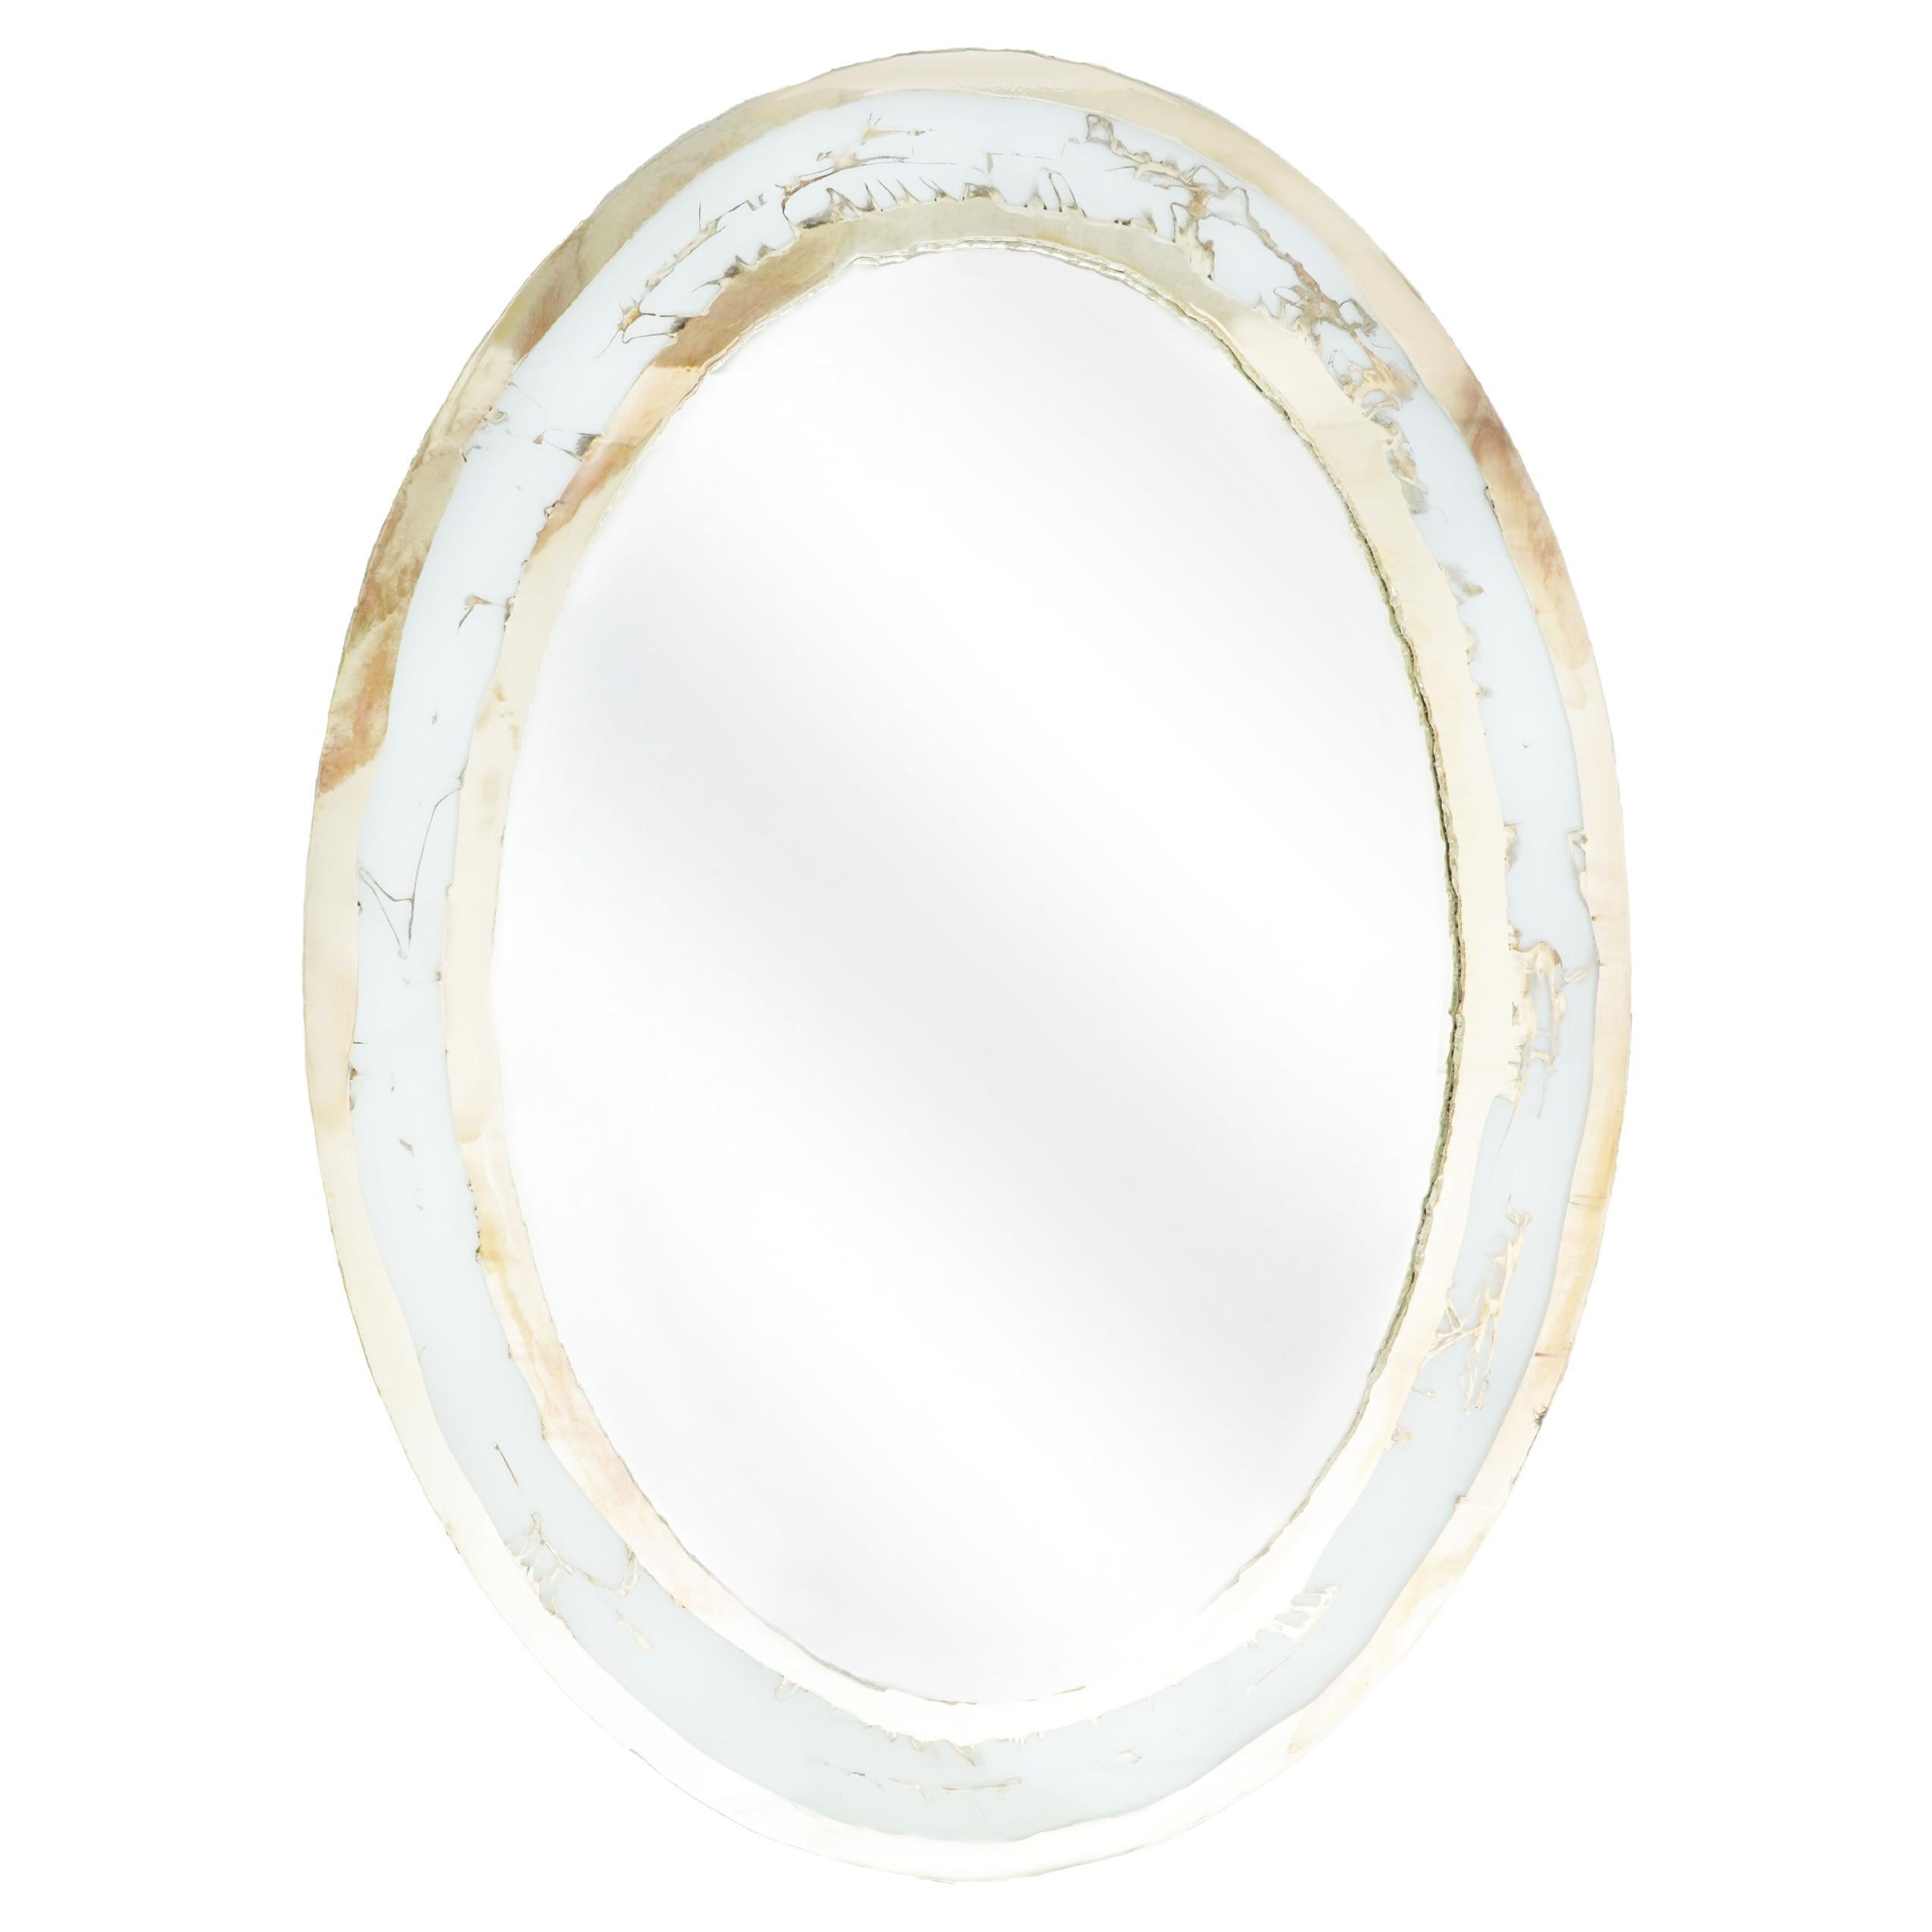 "Life" Contemporary wall Mirror, White Glass frame, art silvered, Central mirror